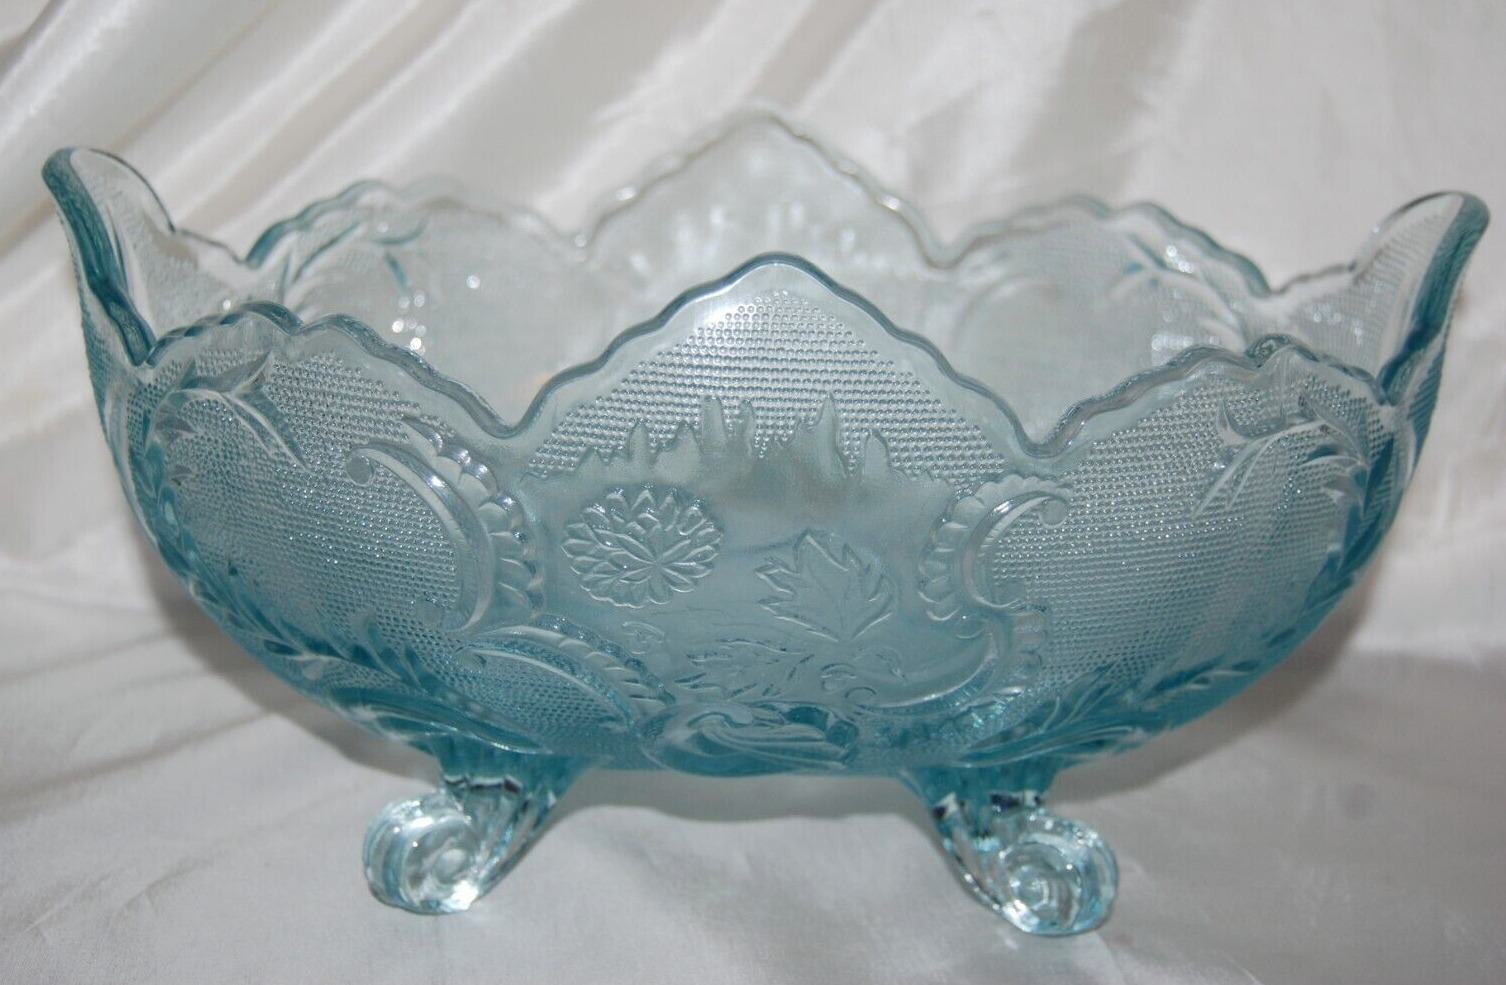 Starlight Ice Blue Jeannette Lombardi Footed Glass Fruit Bowl * Jaded Edges